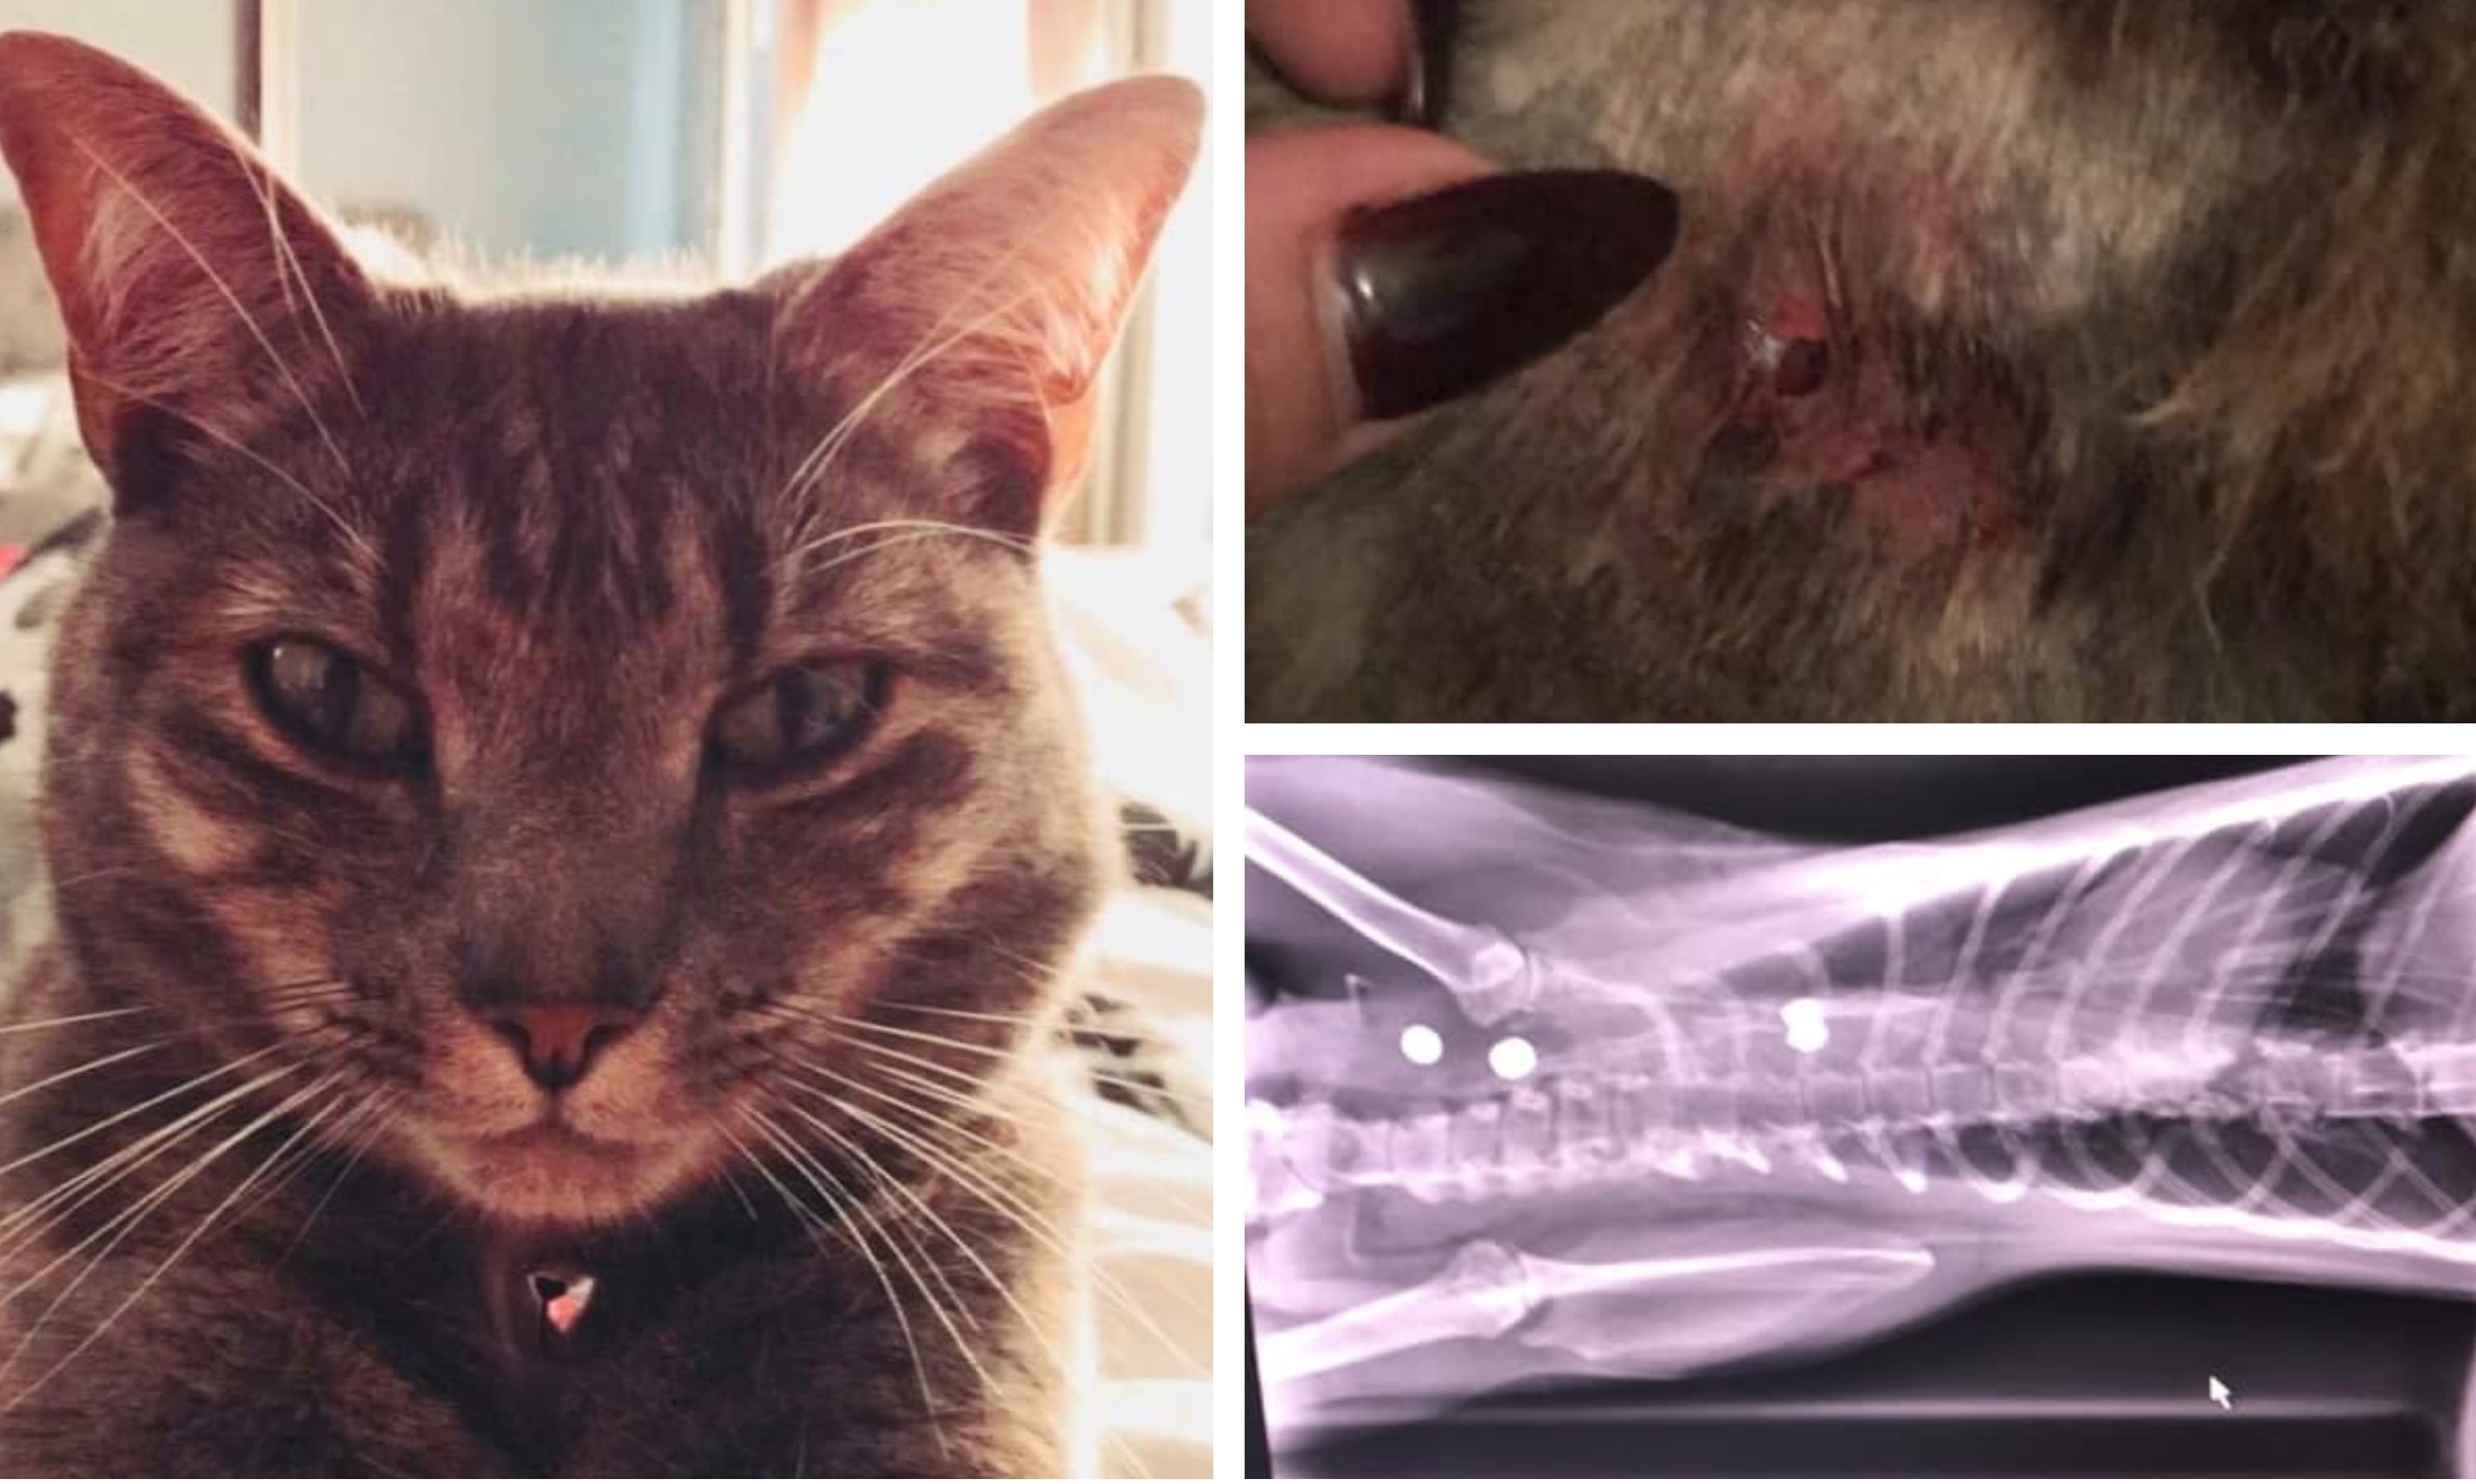 Bella the cat is said to have been shot four times.